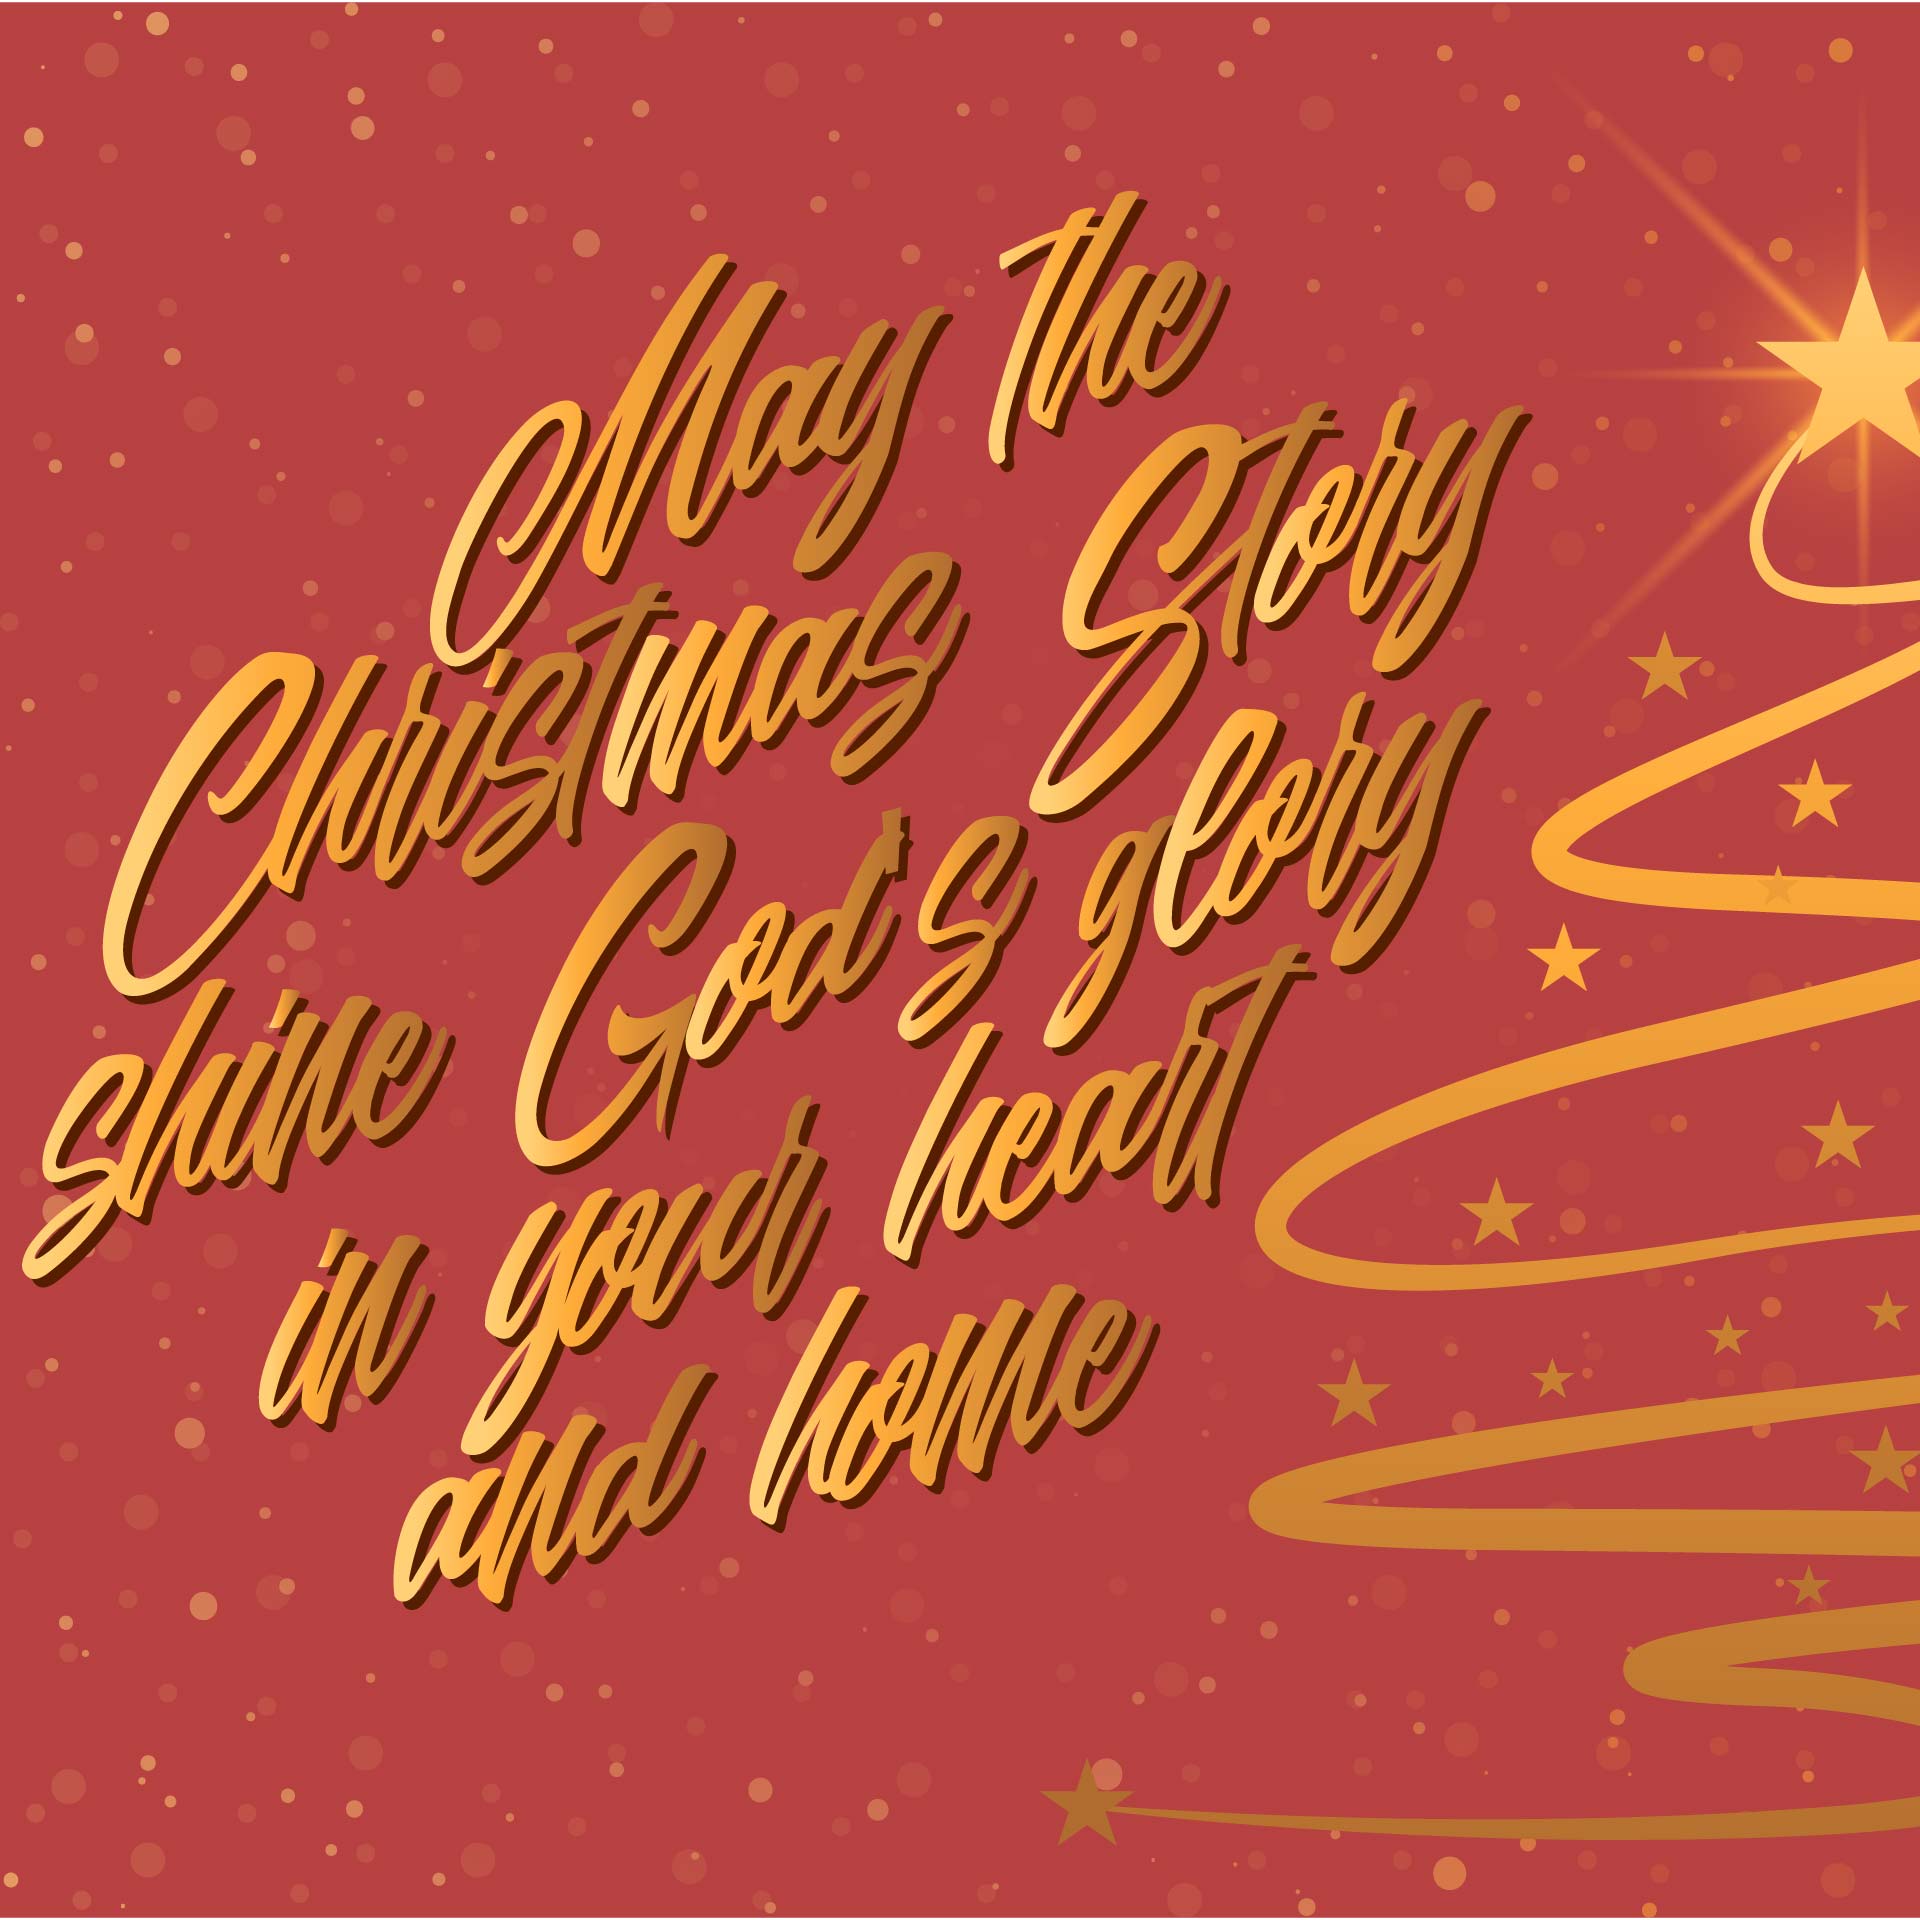 8 Best Images of Free Printable Christian Christmas Greetings Card